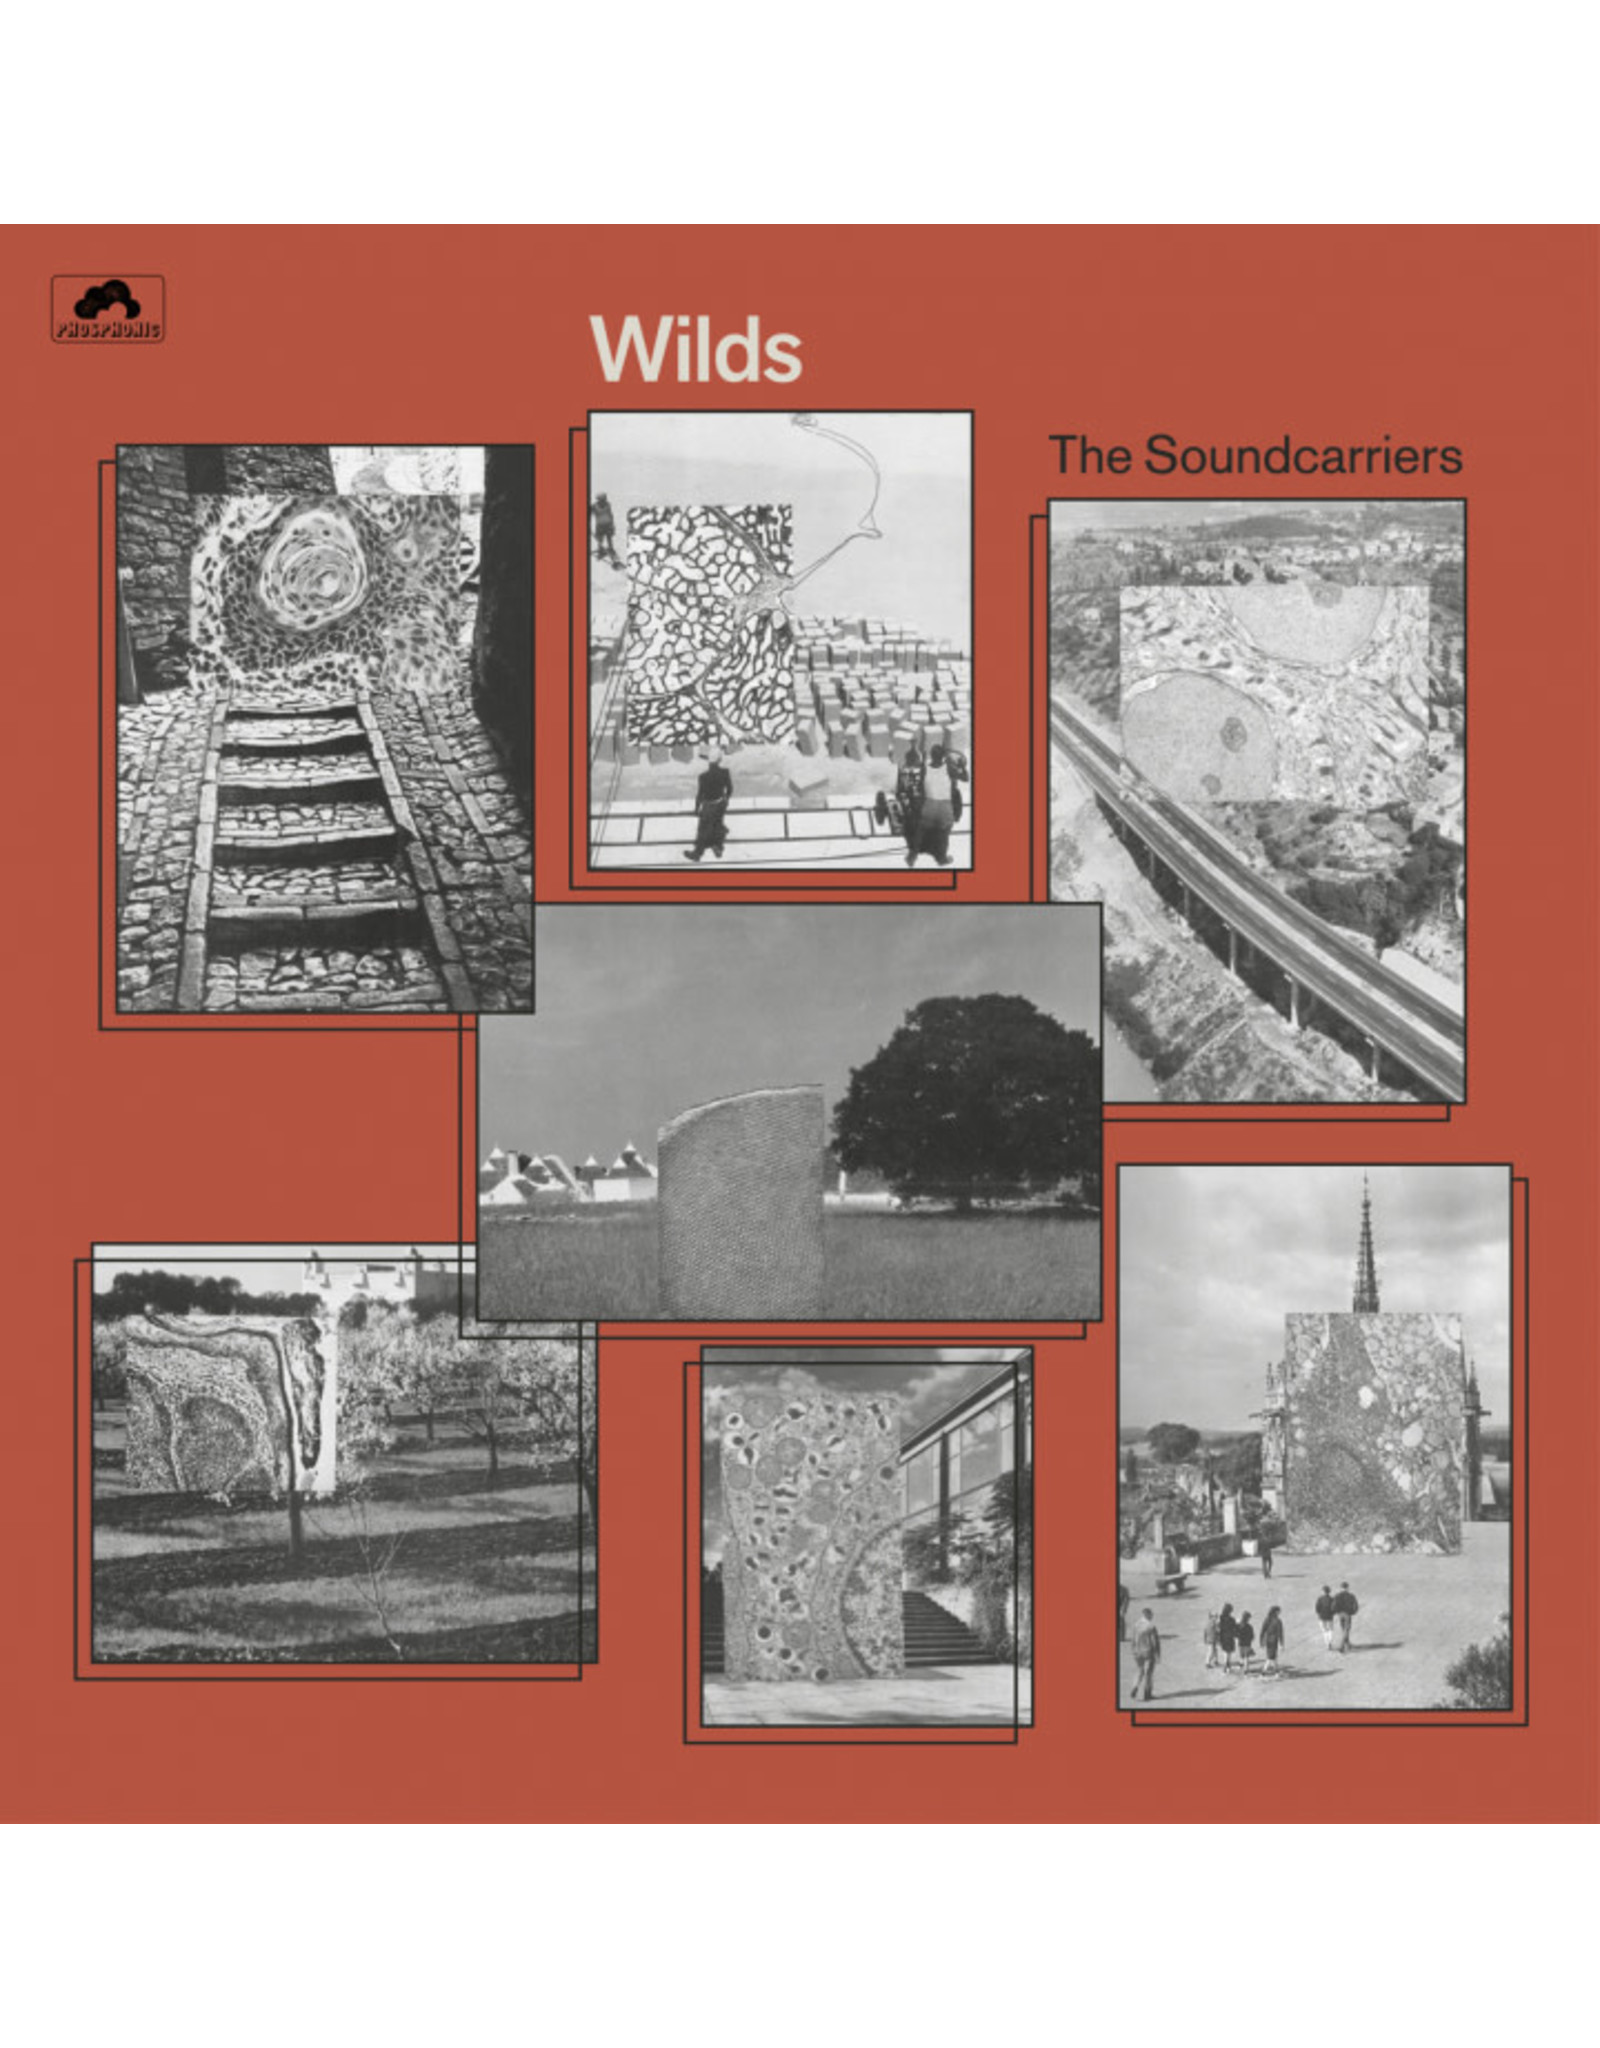 Phosphonic Soundcarriers, The: Wilds LP